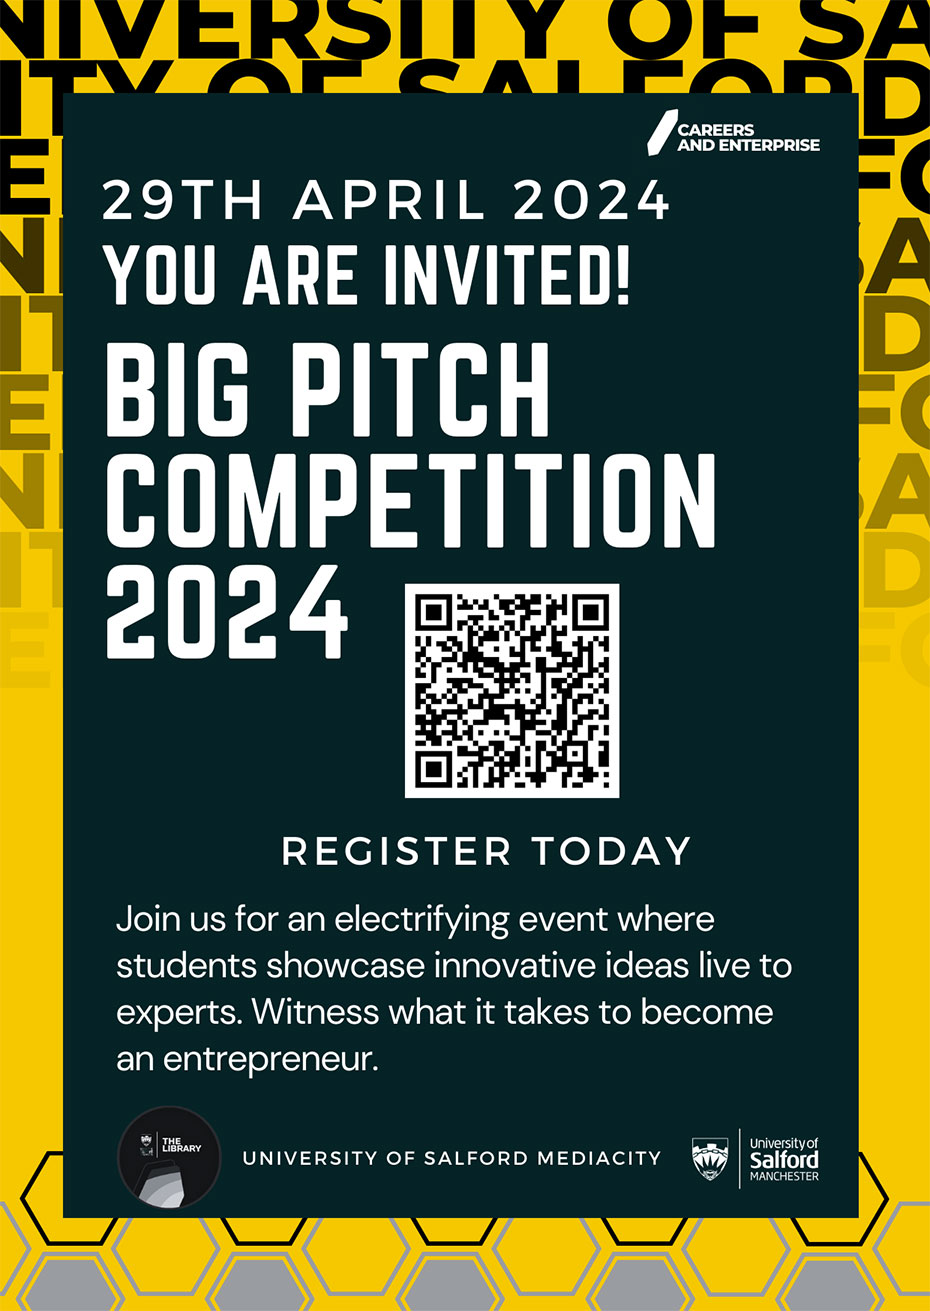 Attend the Big Pitch Competition 2024